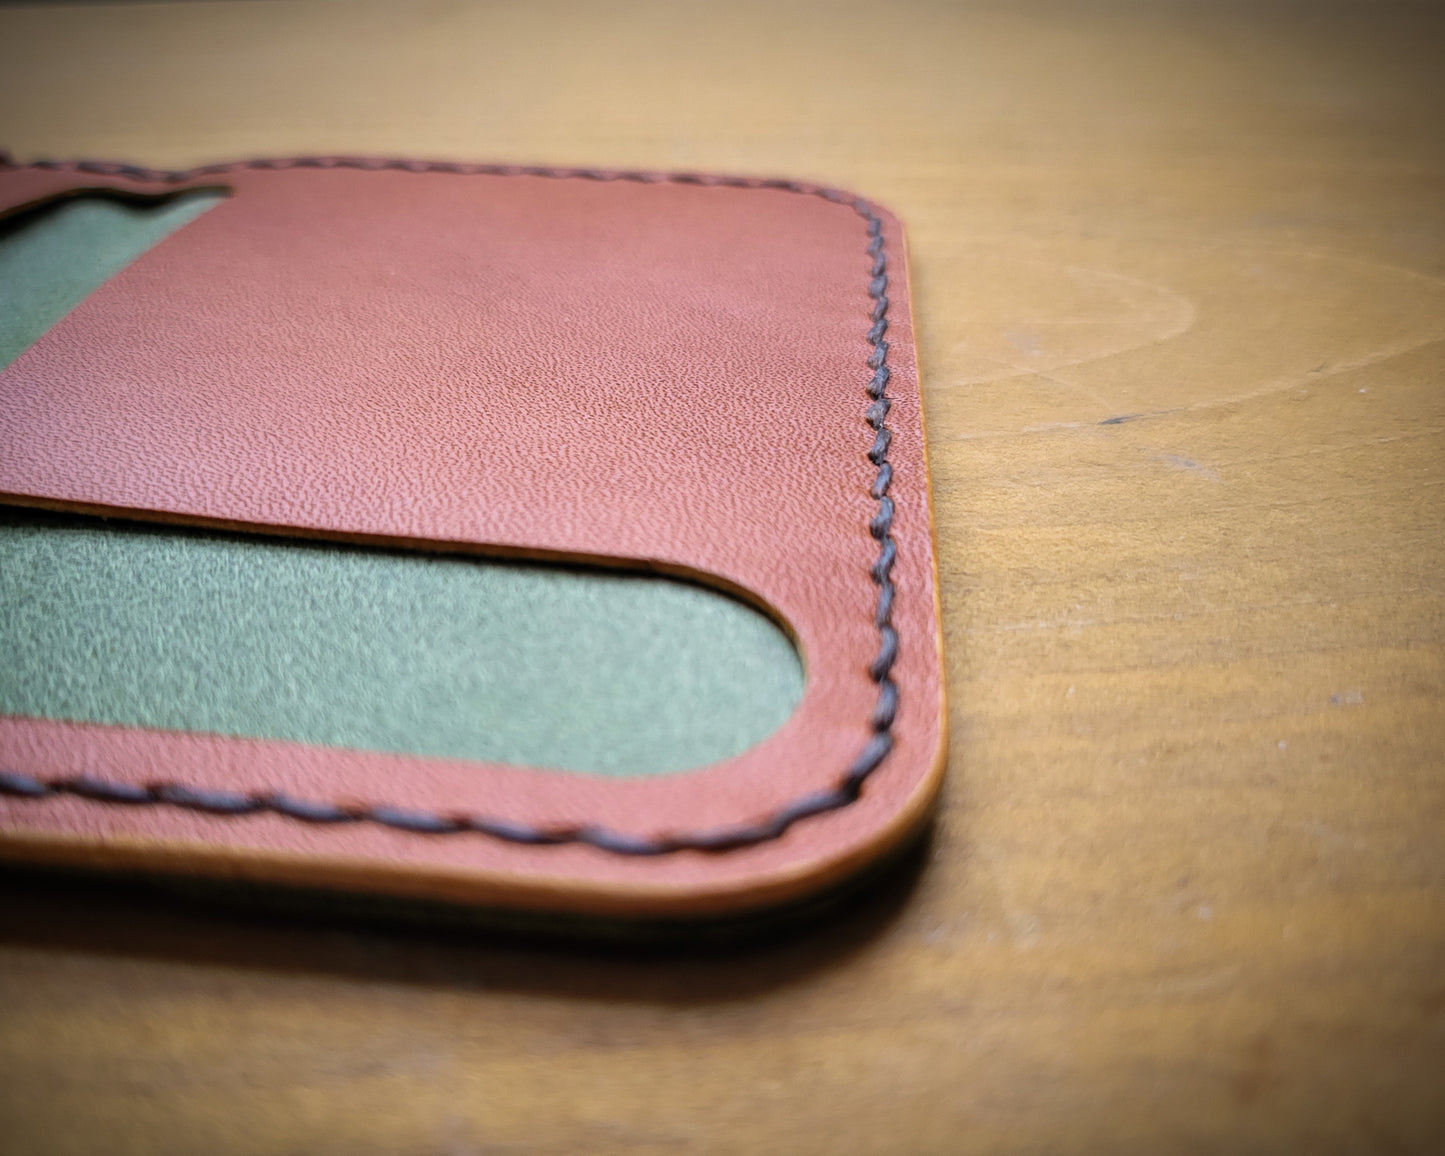 Closeup image of the tan Wickett & Craig interior of a green Pueblo Leather minimalist wallet. The image is focused on the brown thread saddle stitching